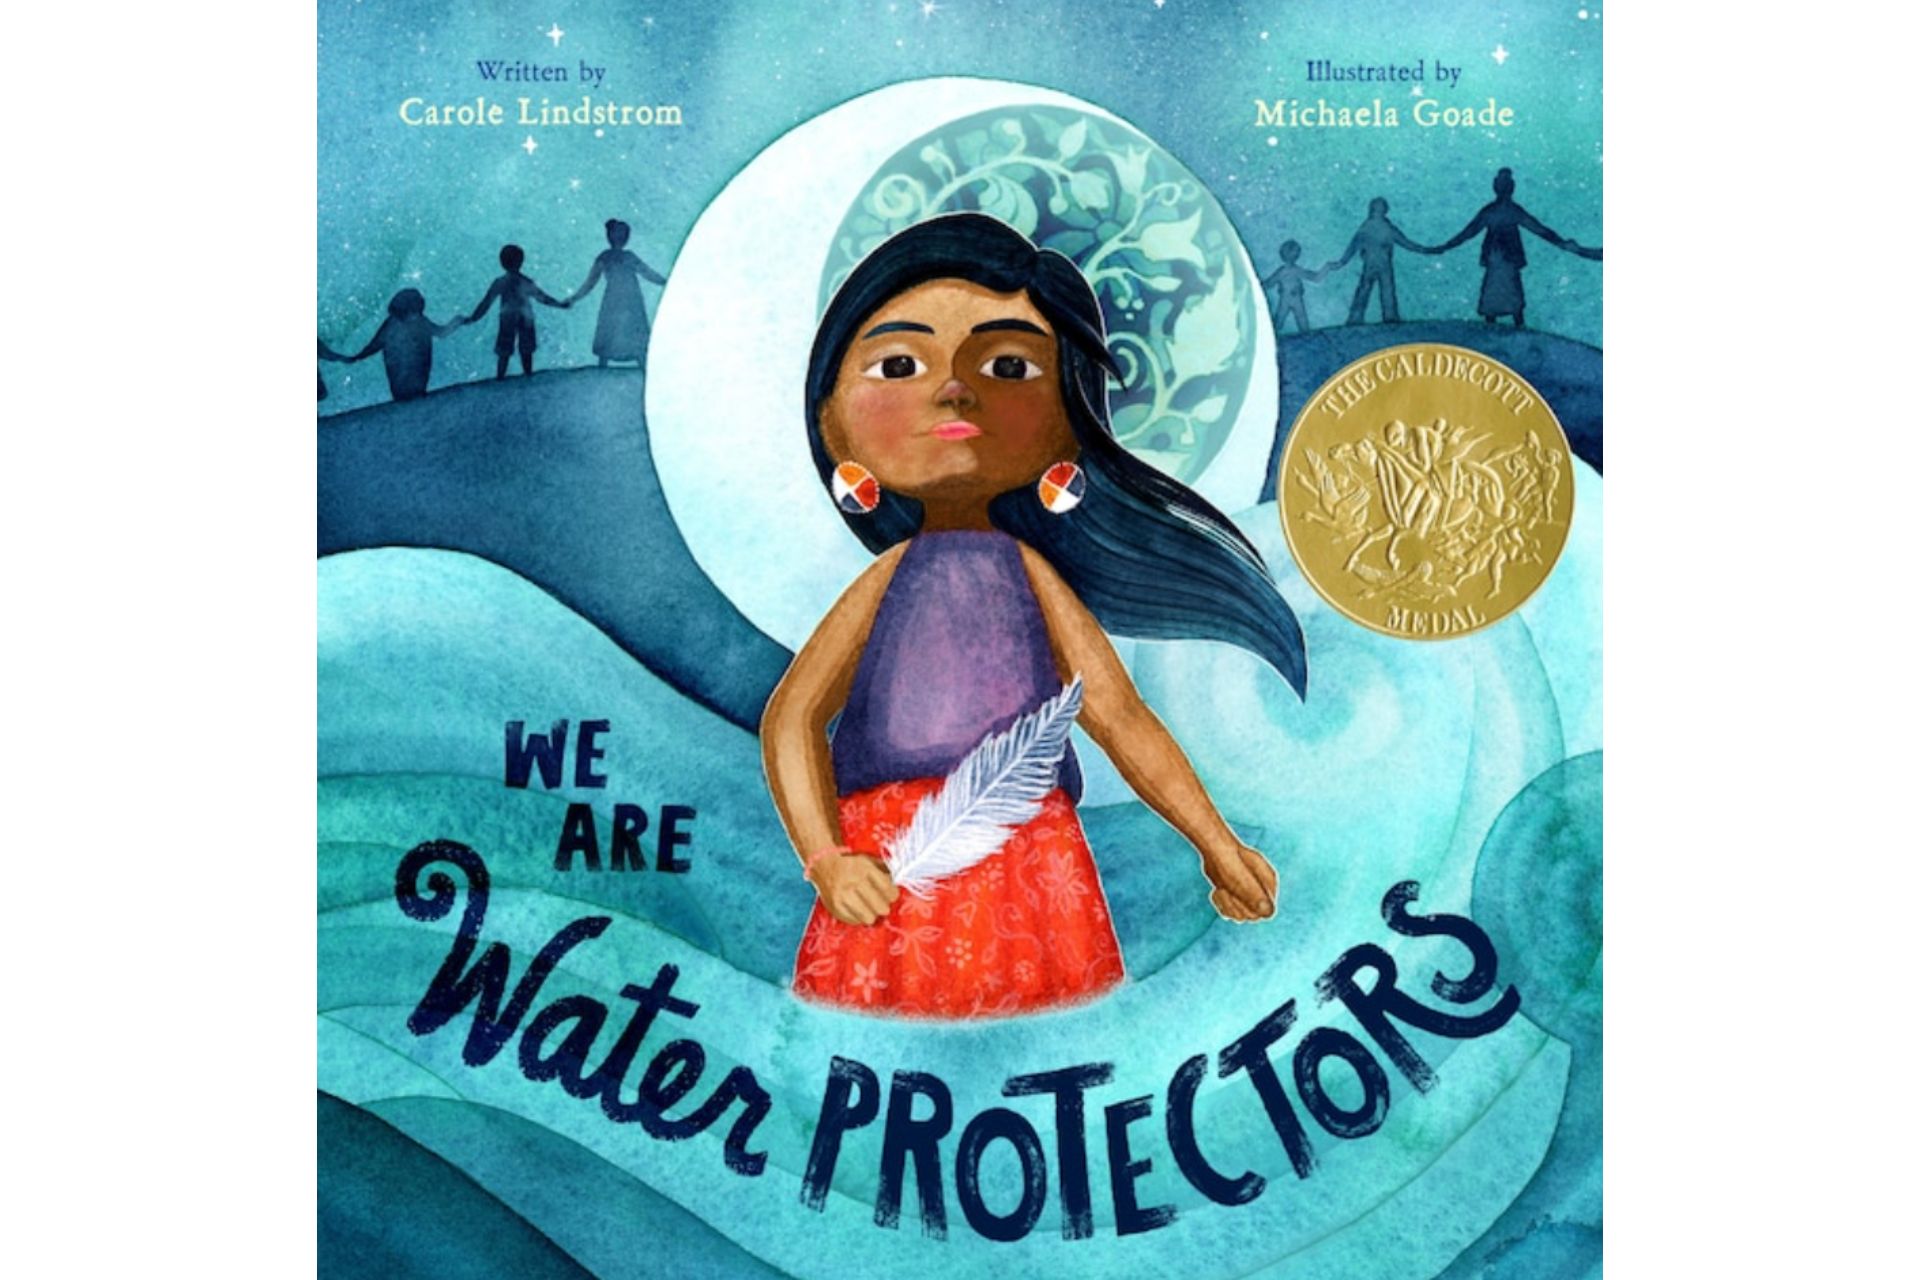 Indigenous wearewaterprotectors 1920x1280 1 - 10 amazing indigenous children's books to add to your child's library